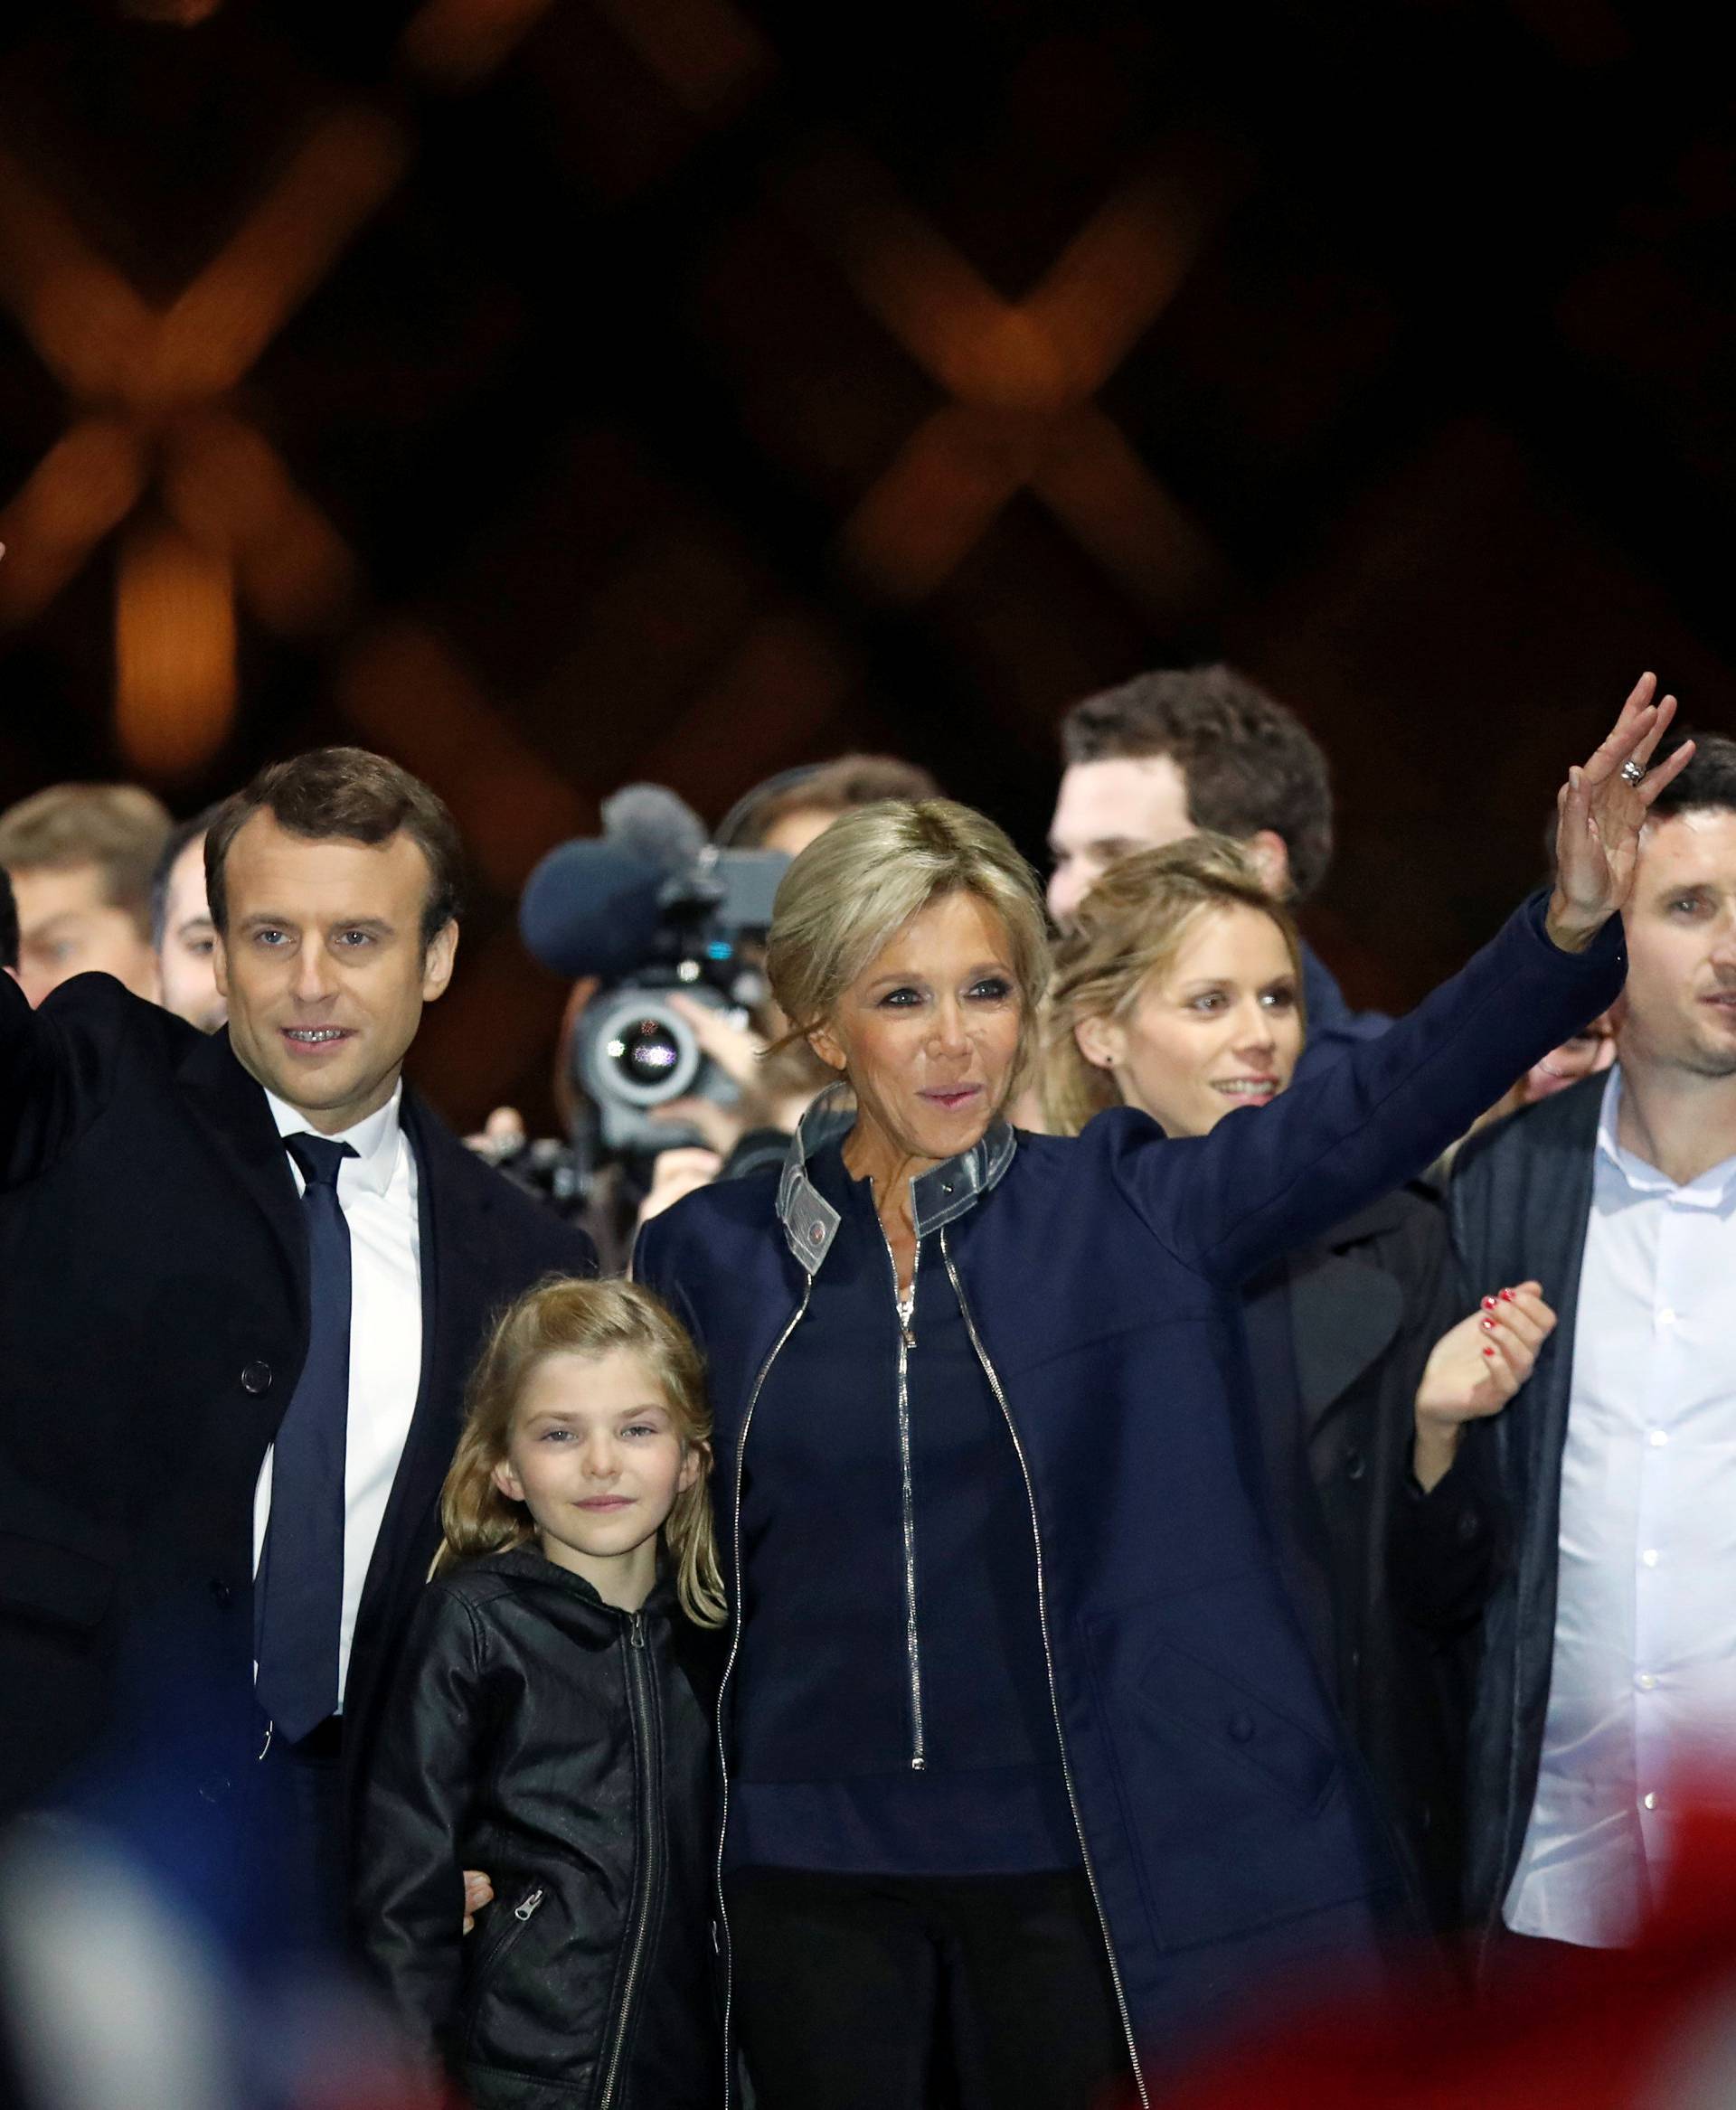 French President elect Emmanuel Macron and his wife Brigitte Trogneux celebrate on the stage at his victory rally near the Louvre in Paris